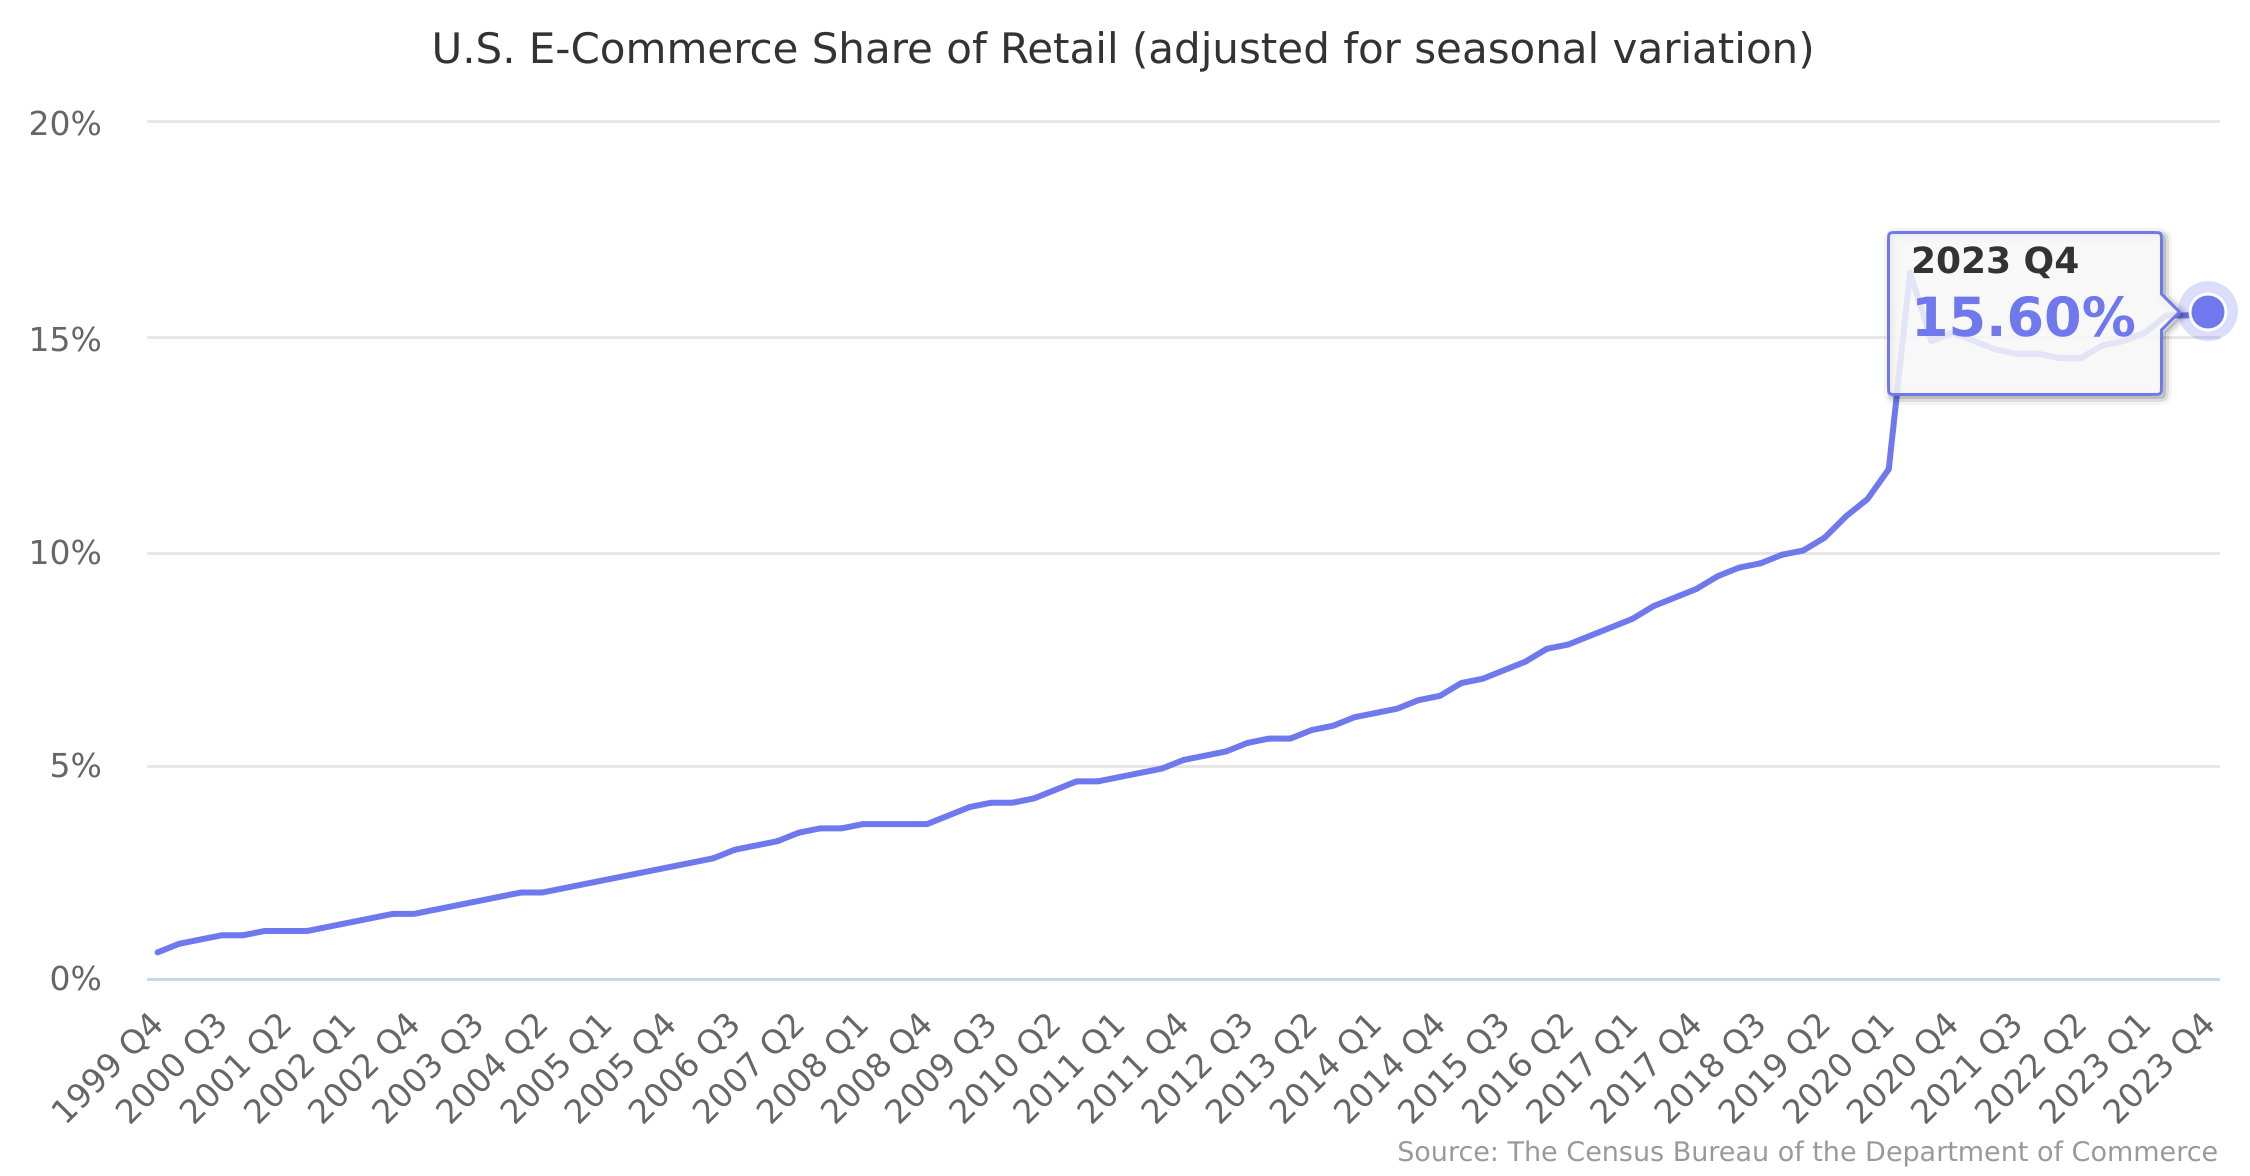 U.S. E-Commerce Share of Retail (adjusted for seasonal variation)